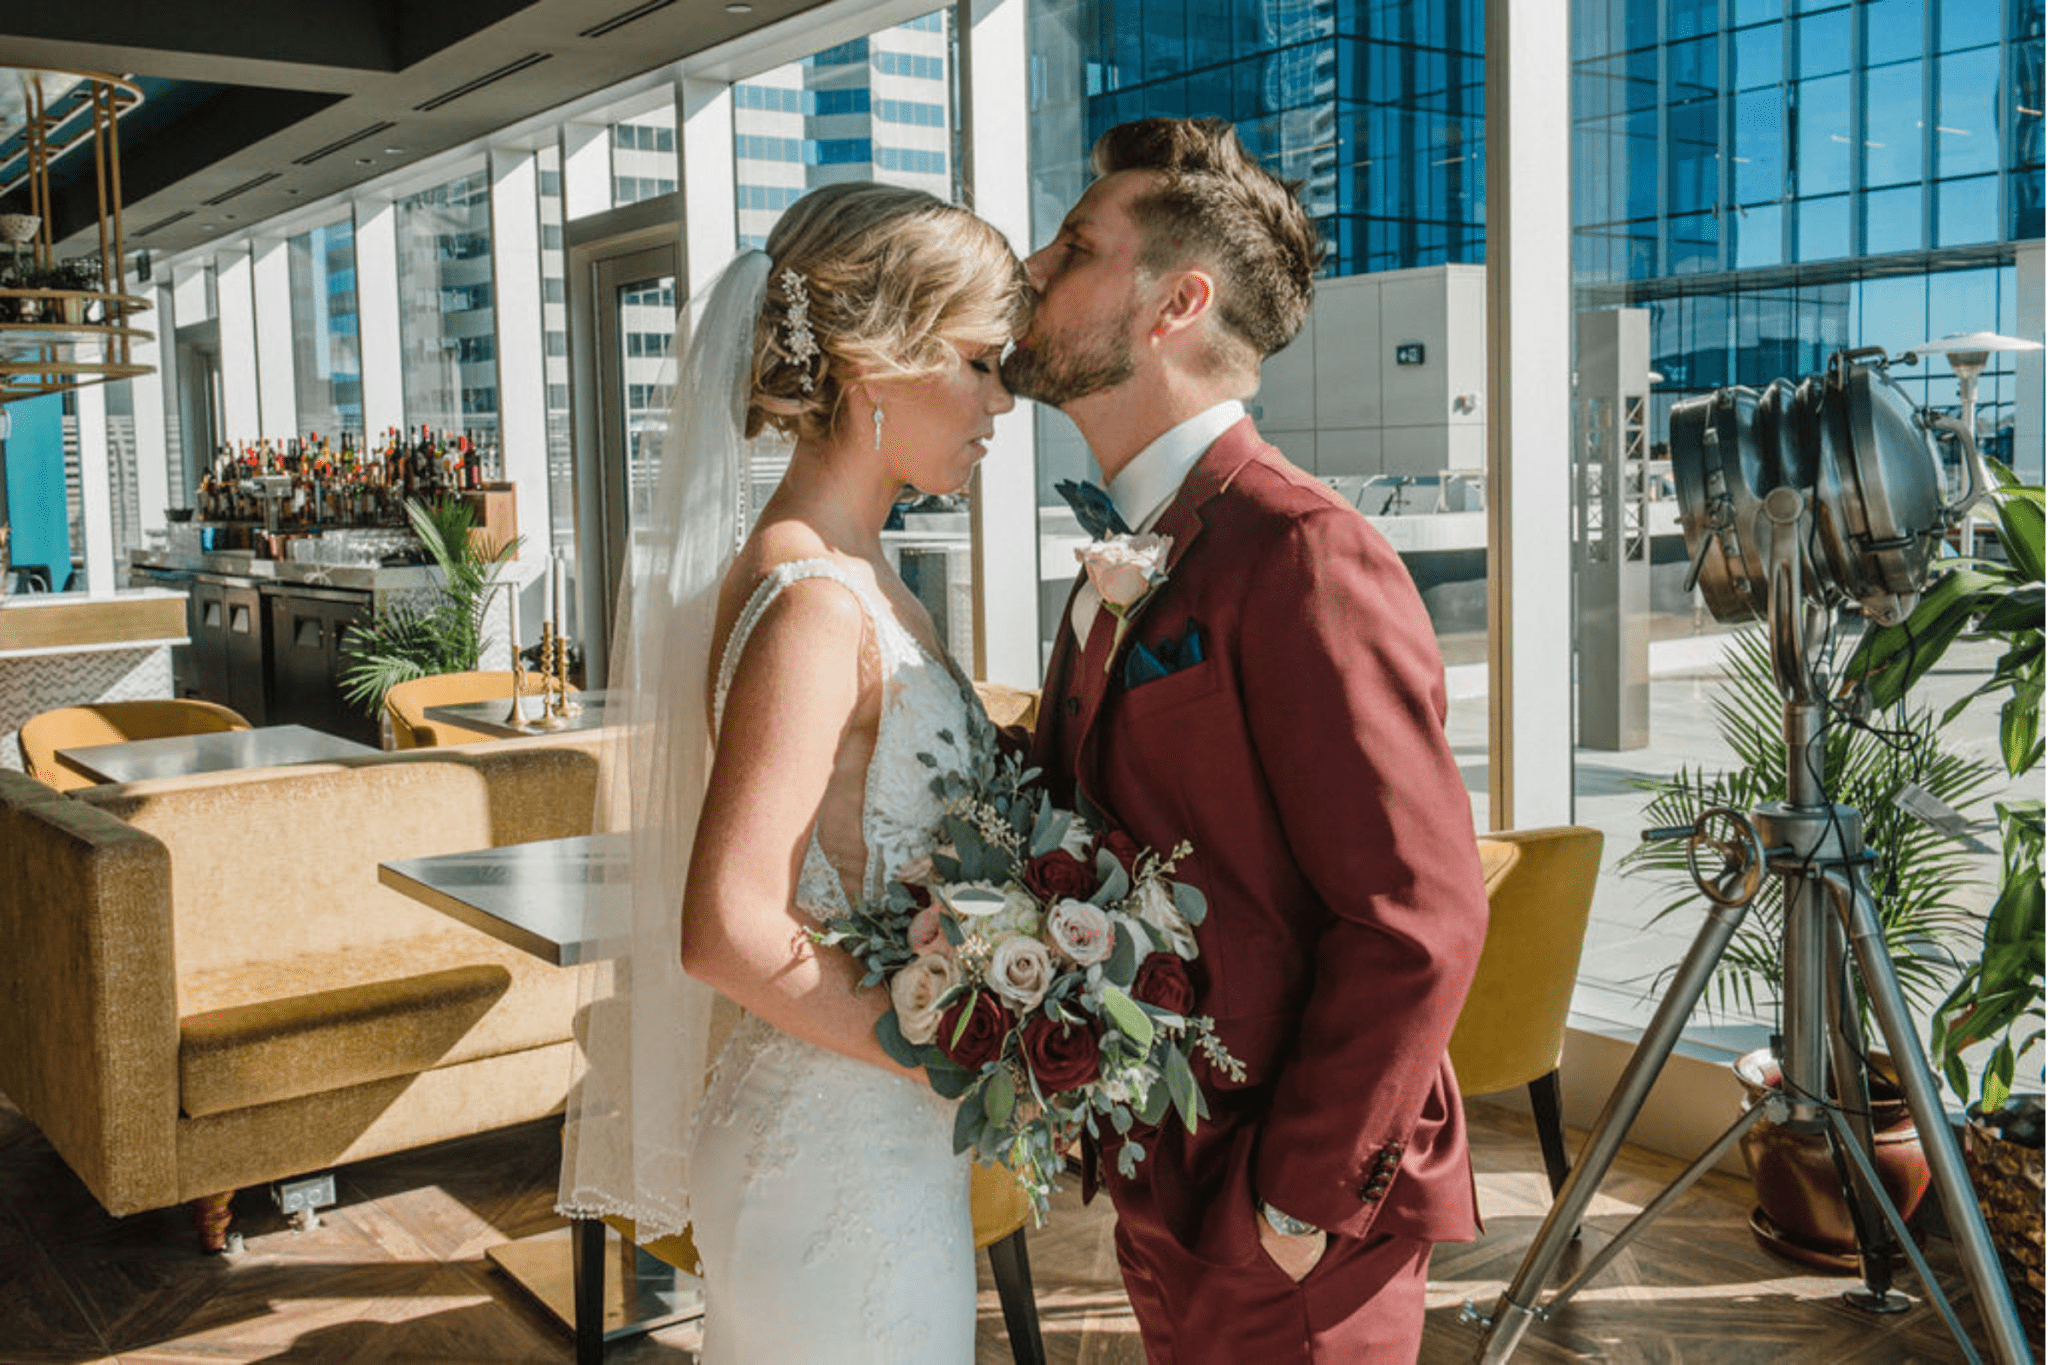 Downtown Edmonton wedding venue in the new ice district